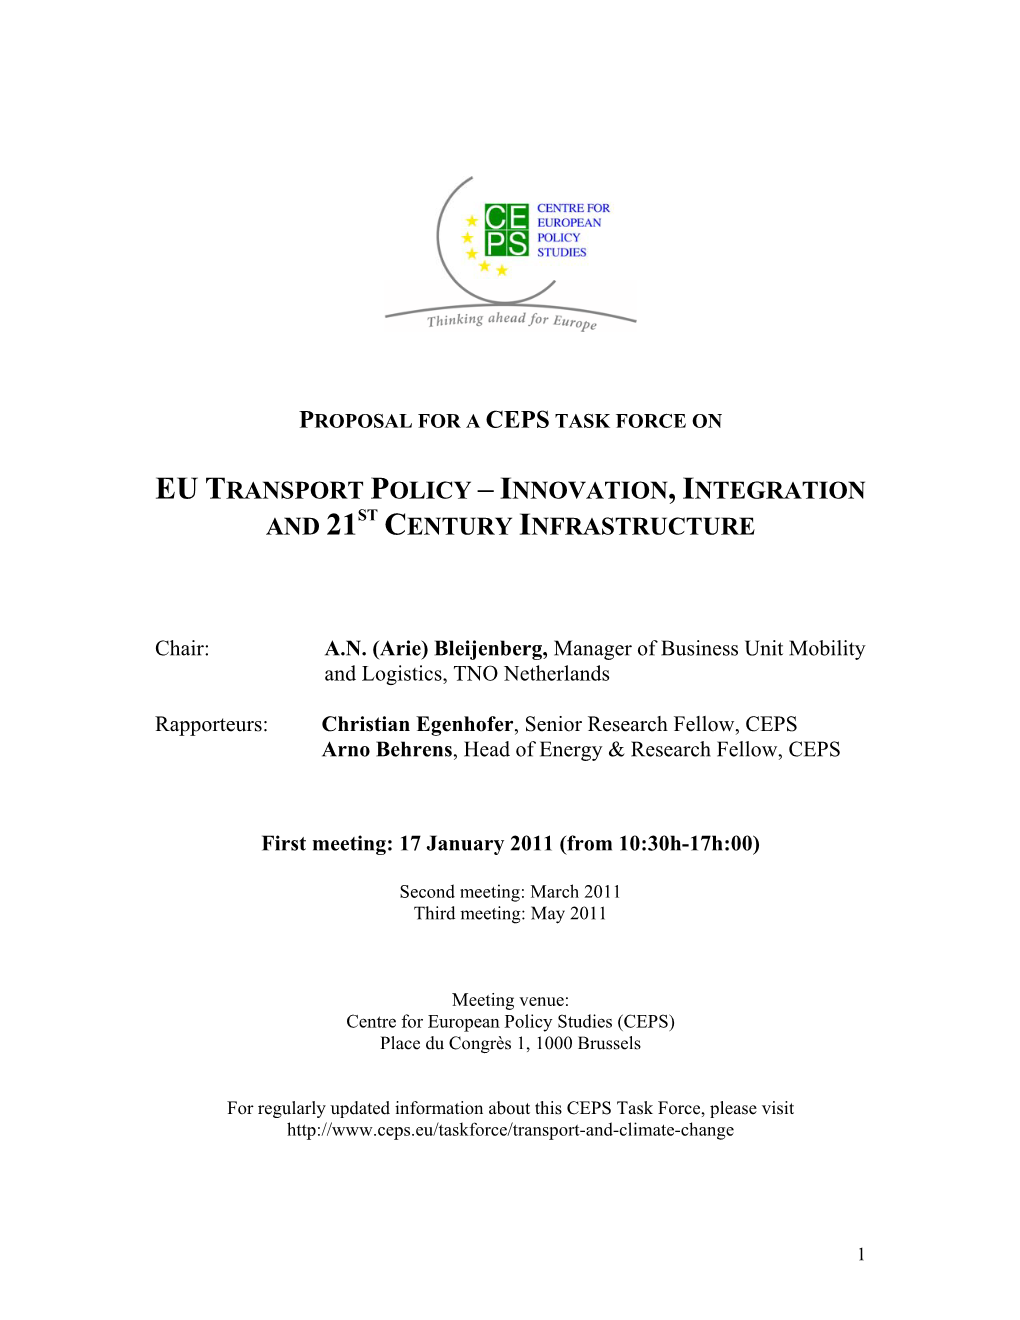 Eu Transport Policy – Innovation, Integration and 21St Century Infrastructure